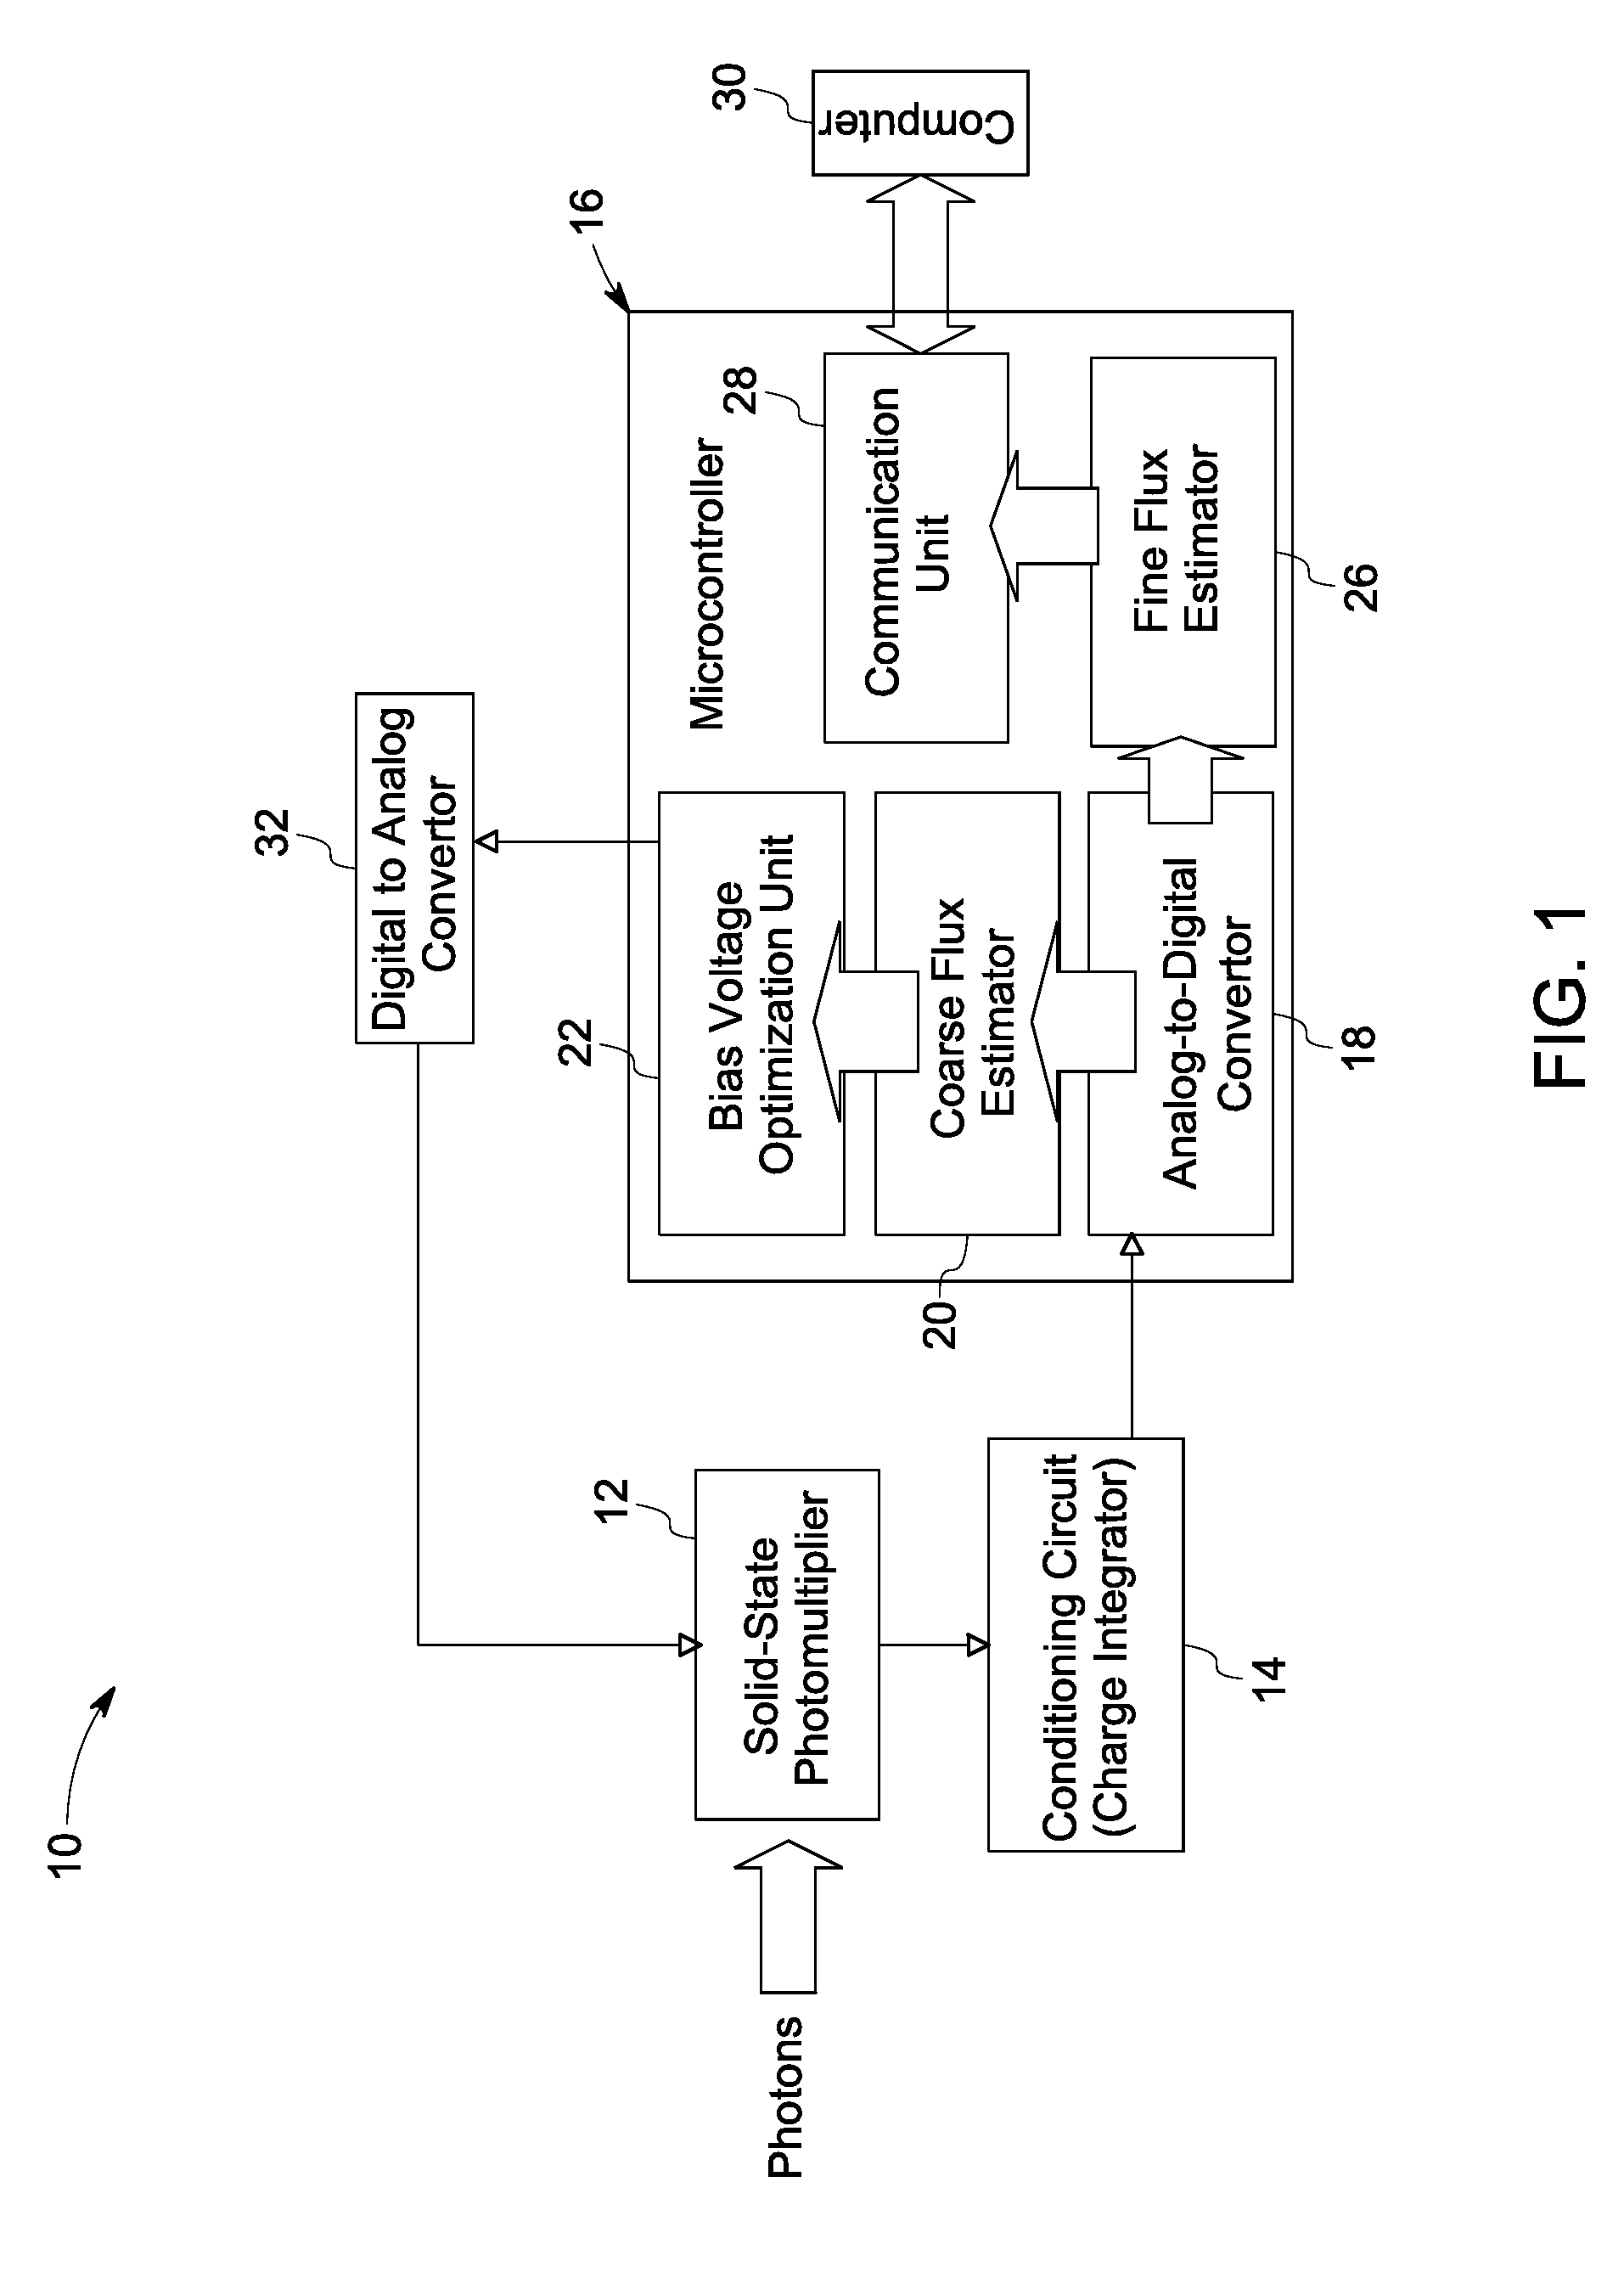 Solid-state photomultiplier module with improved signal-to-noise ratio